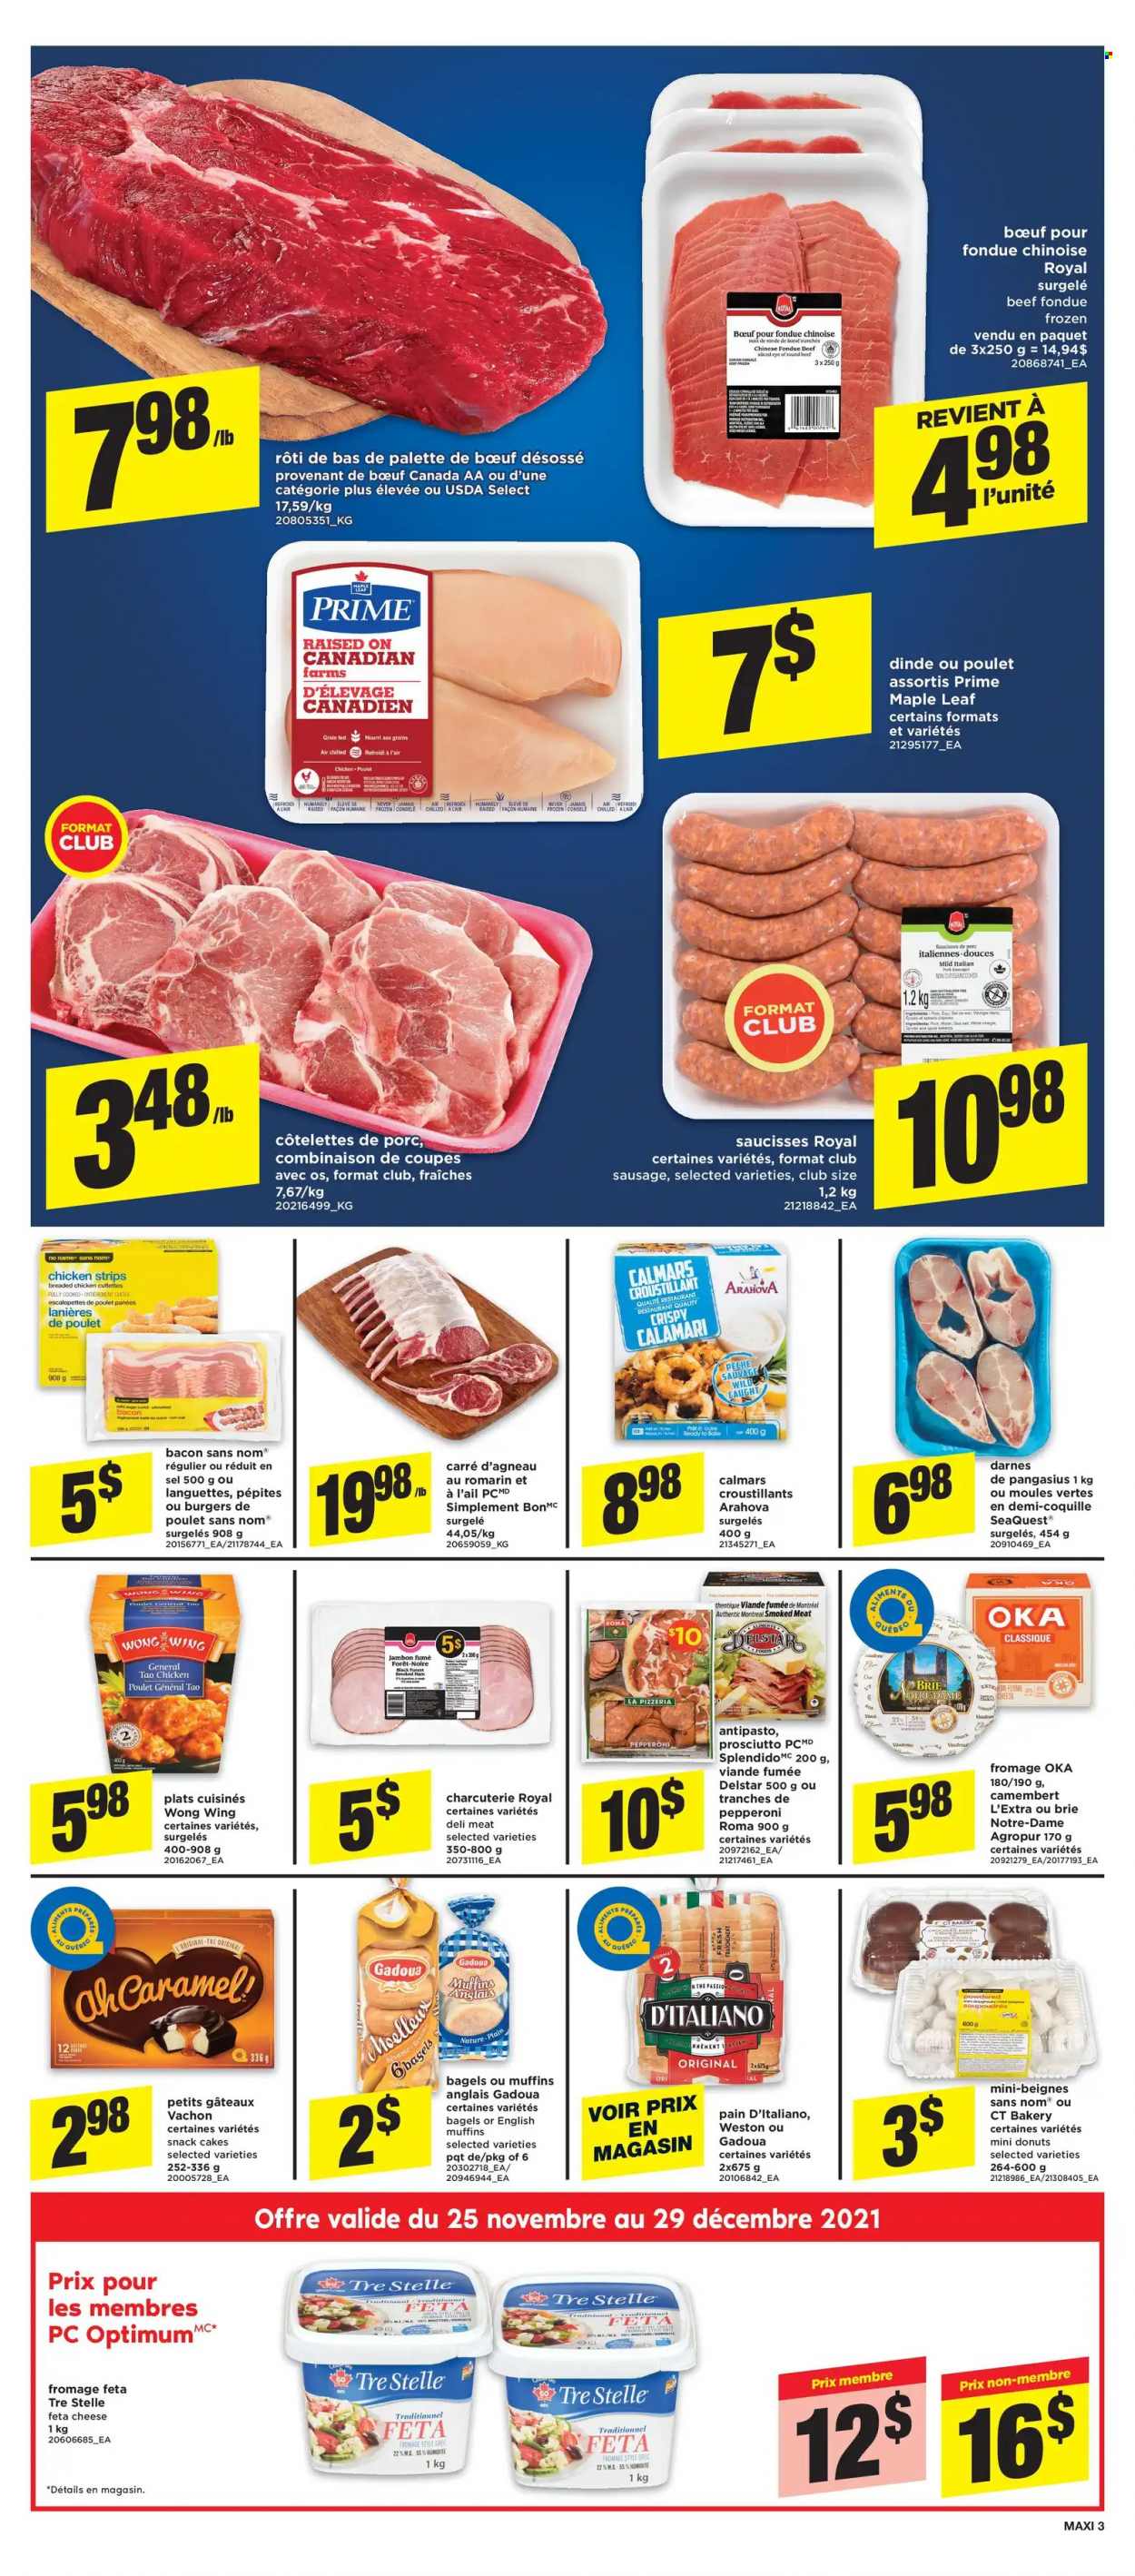 thumbnail - Maxi & Cie Flyer - November 25, 2021 - December 01, 2021 - Sales products - bagels, english muffins, cake, donut, calamari, pangasius, No Name, hamburger, fried chicken, bacon, prosciutto, sausage, pepperoni, cheese, brie, feta, strips, chicken strips, snack, tea, eye of round, Palette, camembert. Page 4.